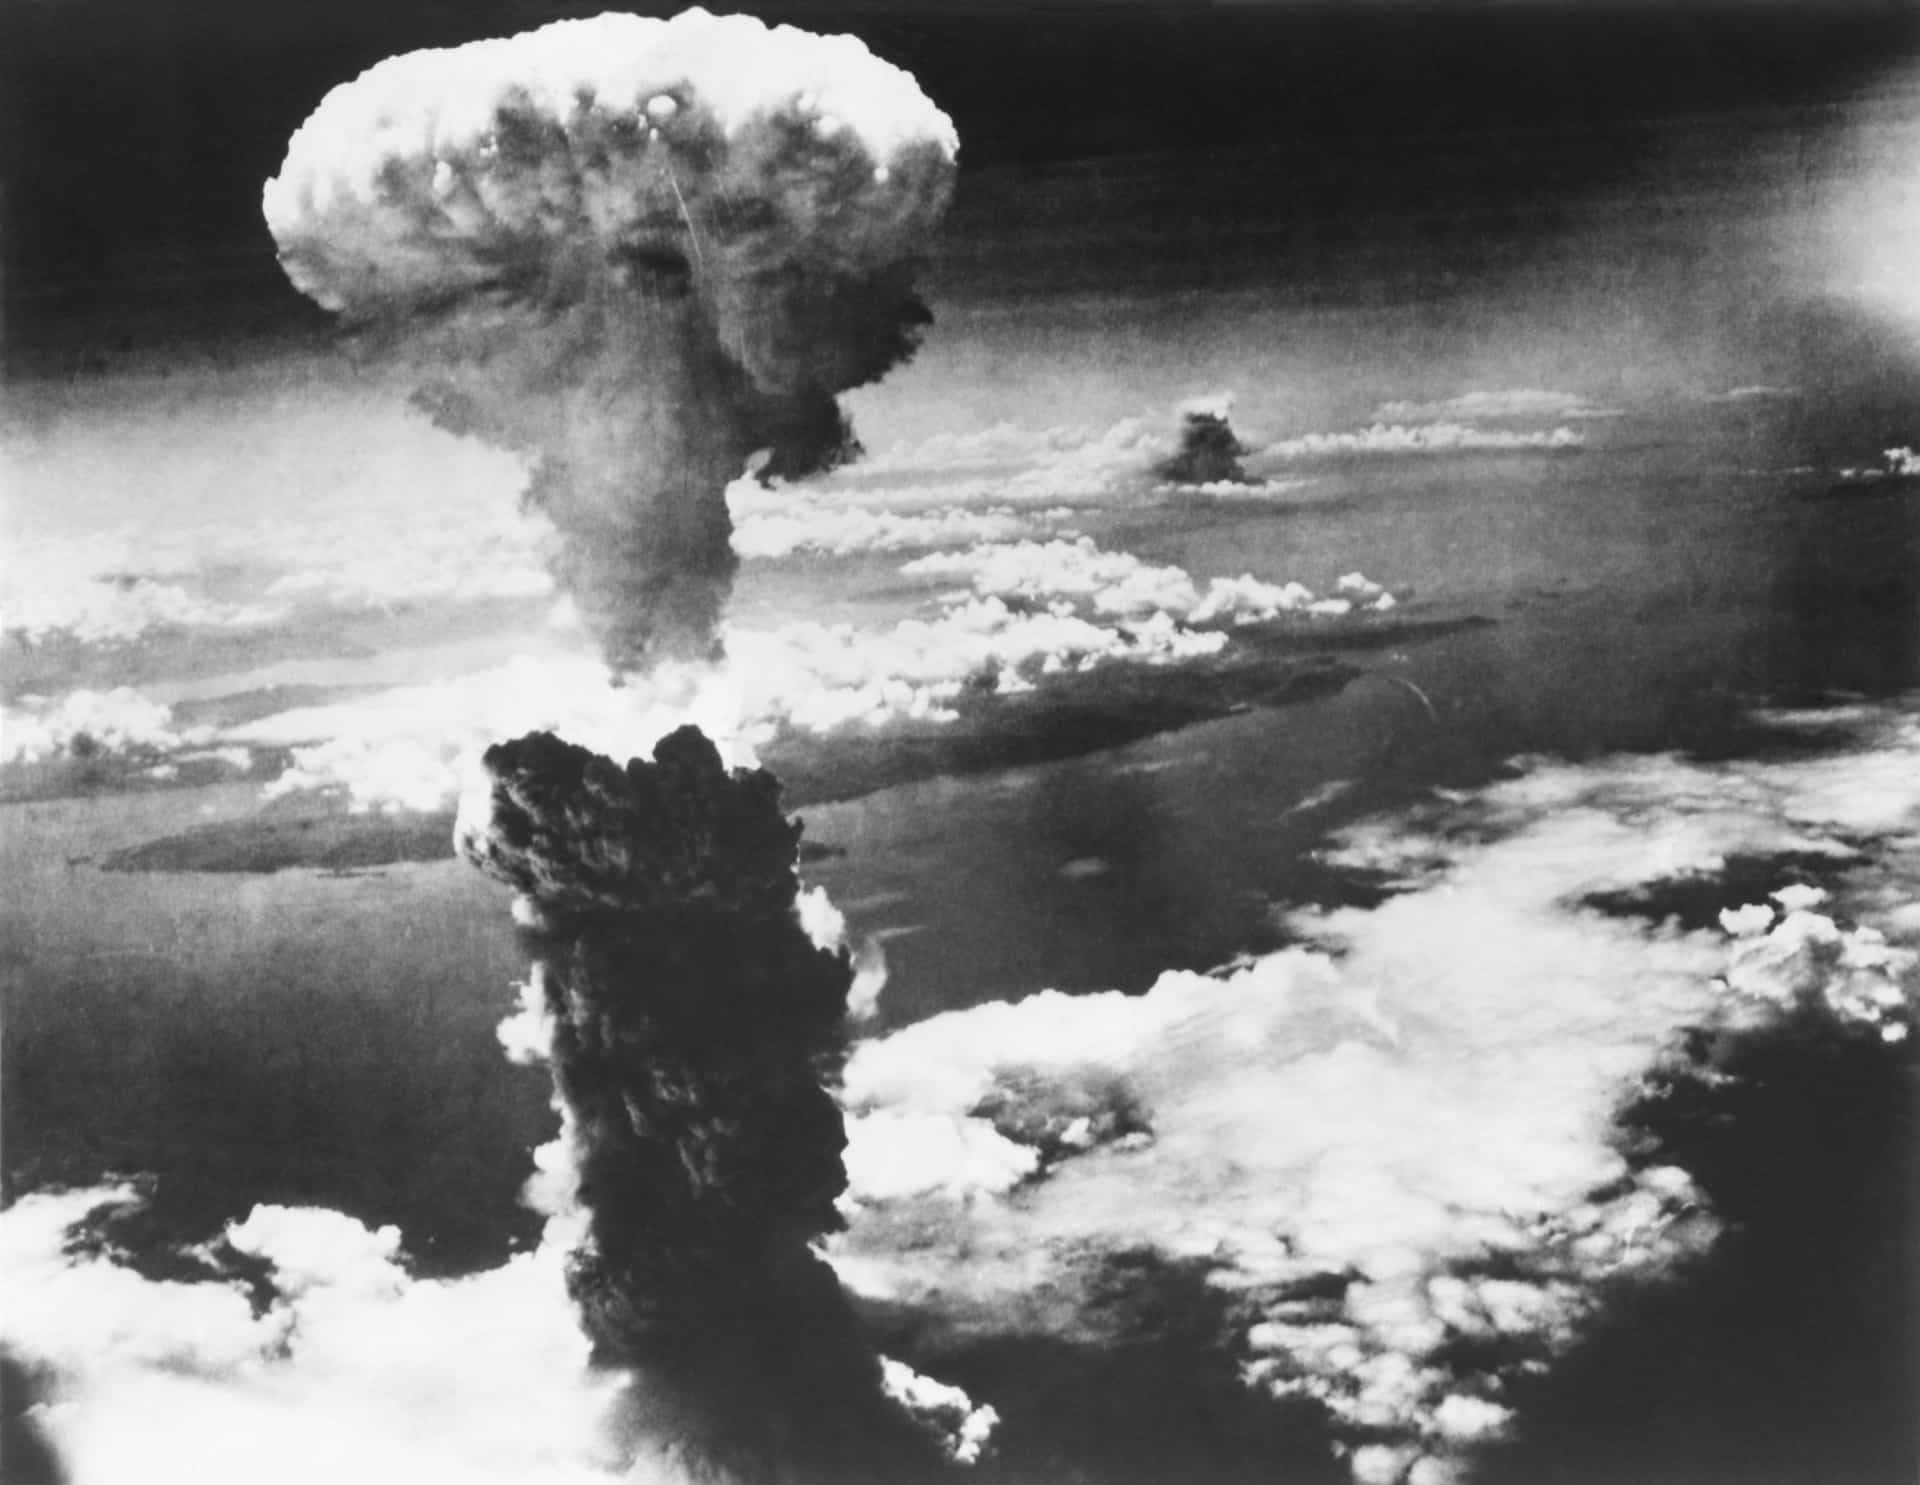 Tsutomu Yamaguchi survived both the atomic bombings of Hiroshima and Nagasaki.<p><a href="https://www.msn.com/en-us/community/channel/vid-7xx8mnucu55yw63we9va2gwr7uihbxwc68fxqp25x6tg4ftibpra?cvid=94631541bc0f4f89bfd59158d696ad7e">Follow us and access great exclusive content everyday</a></p>